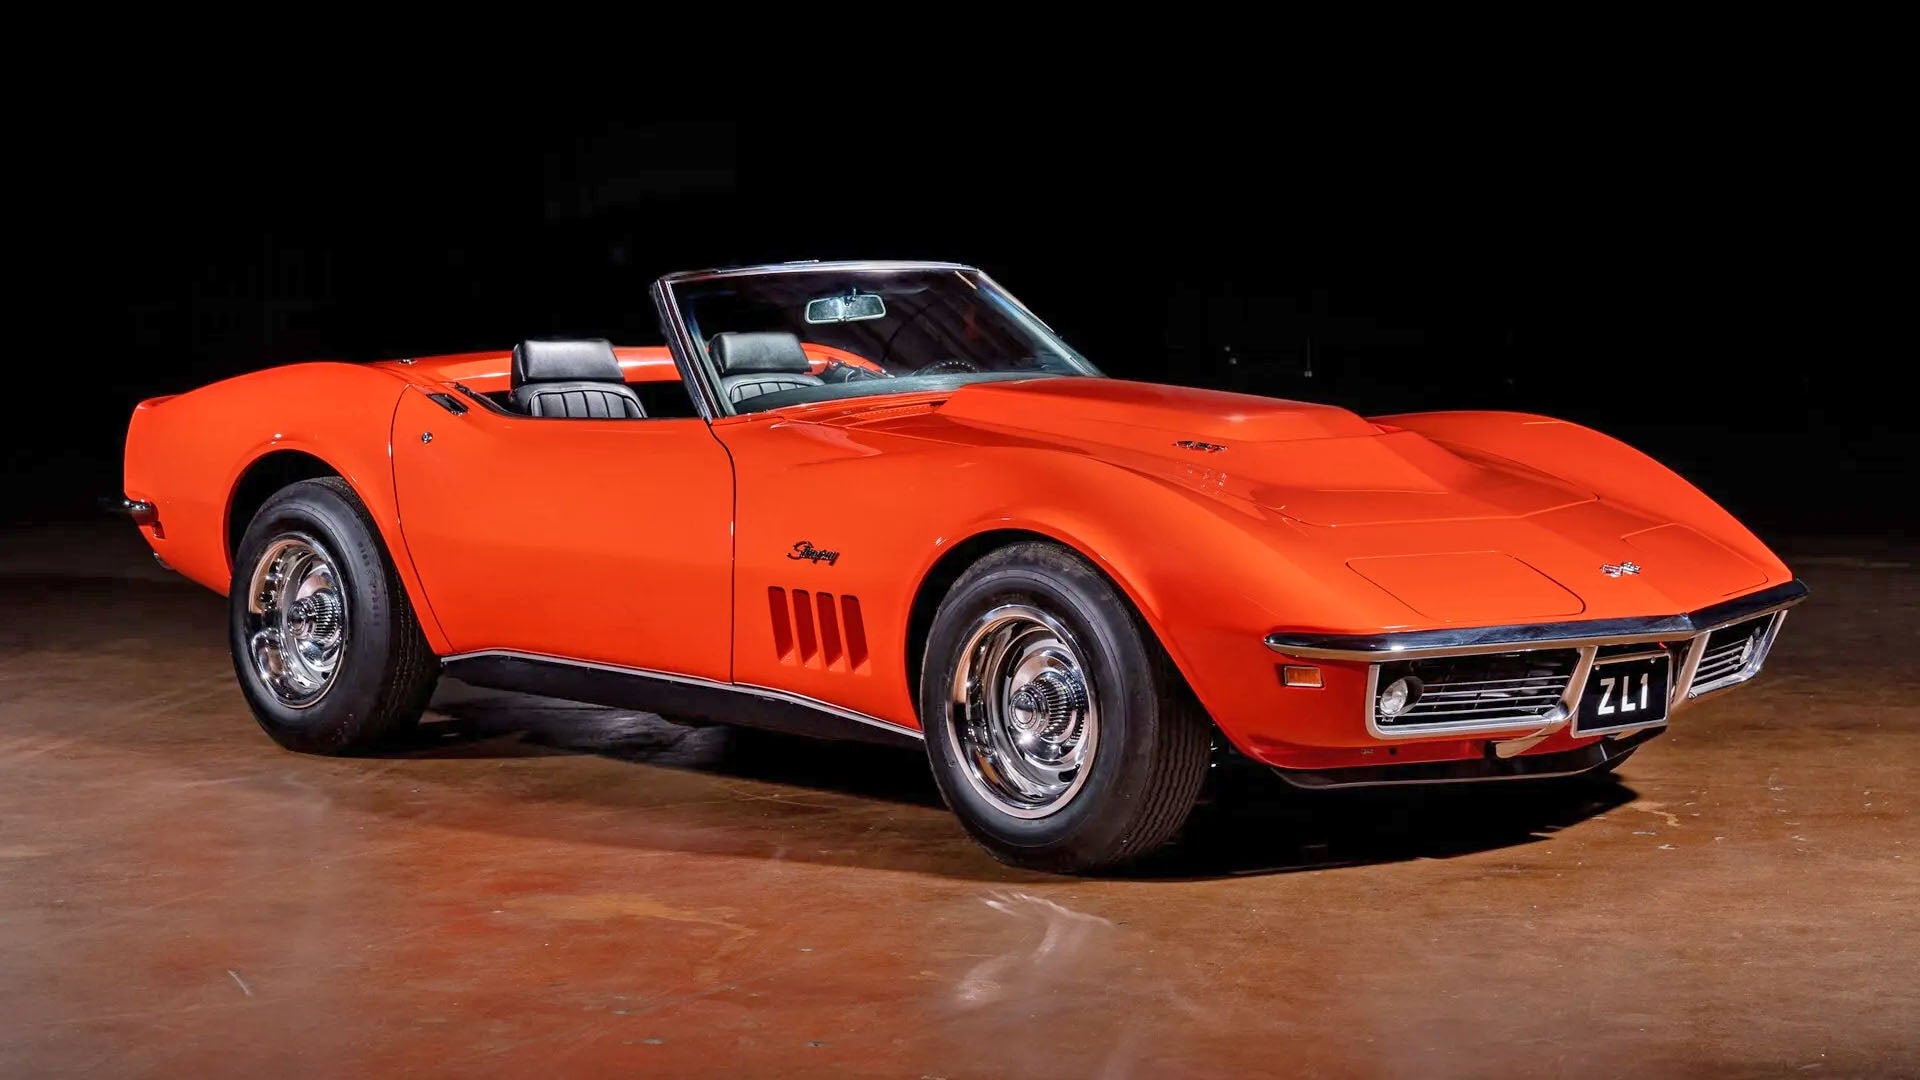 1969 Chevrolet Corvette Stingray ZL-1 Could Become Most Expensive ‘Vette Ever Sold